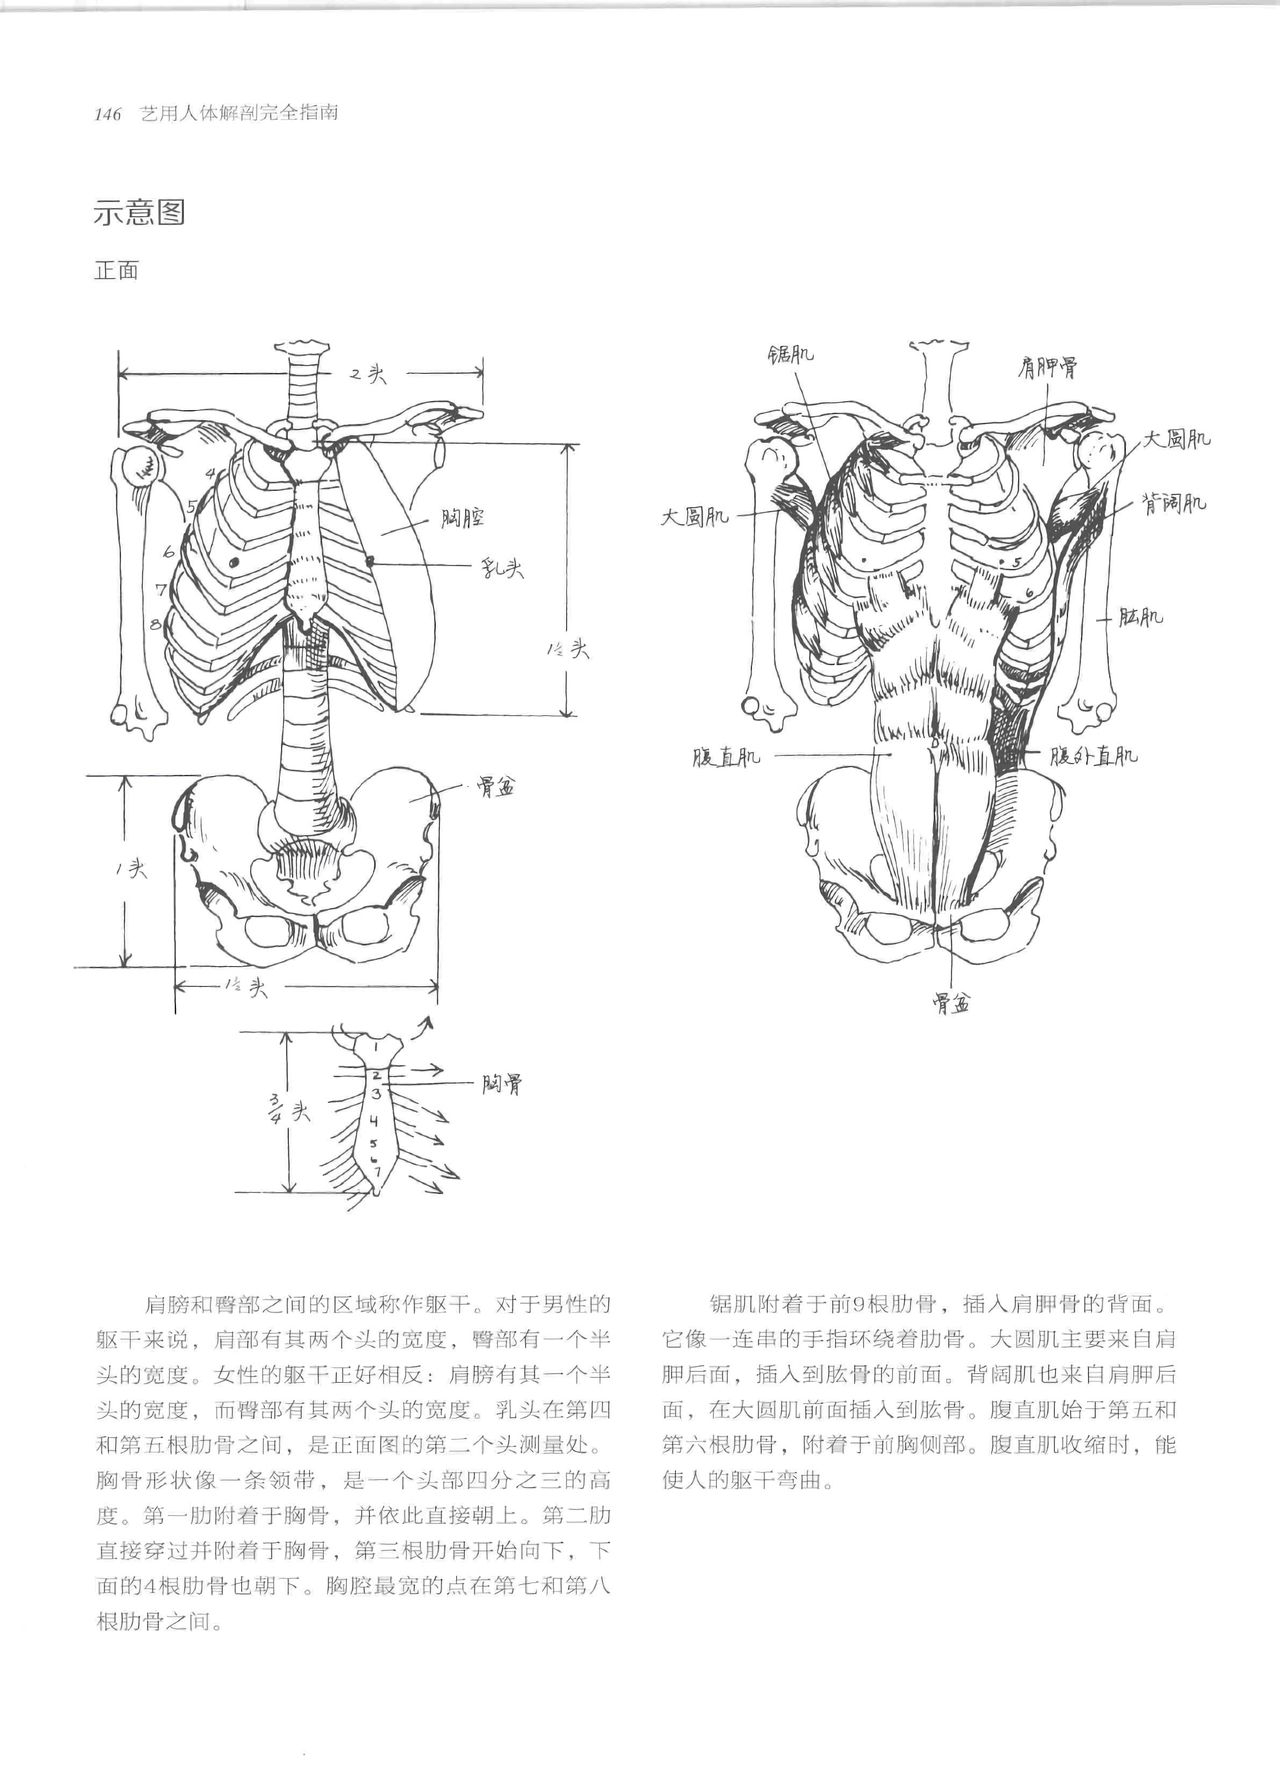 Anatomy-A Complete Guide for Artists - Joseph Sheppard [Chinese] 146